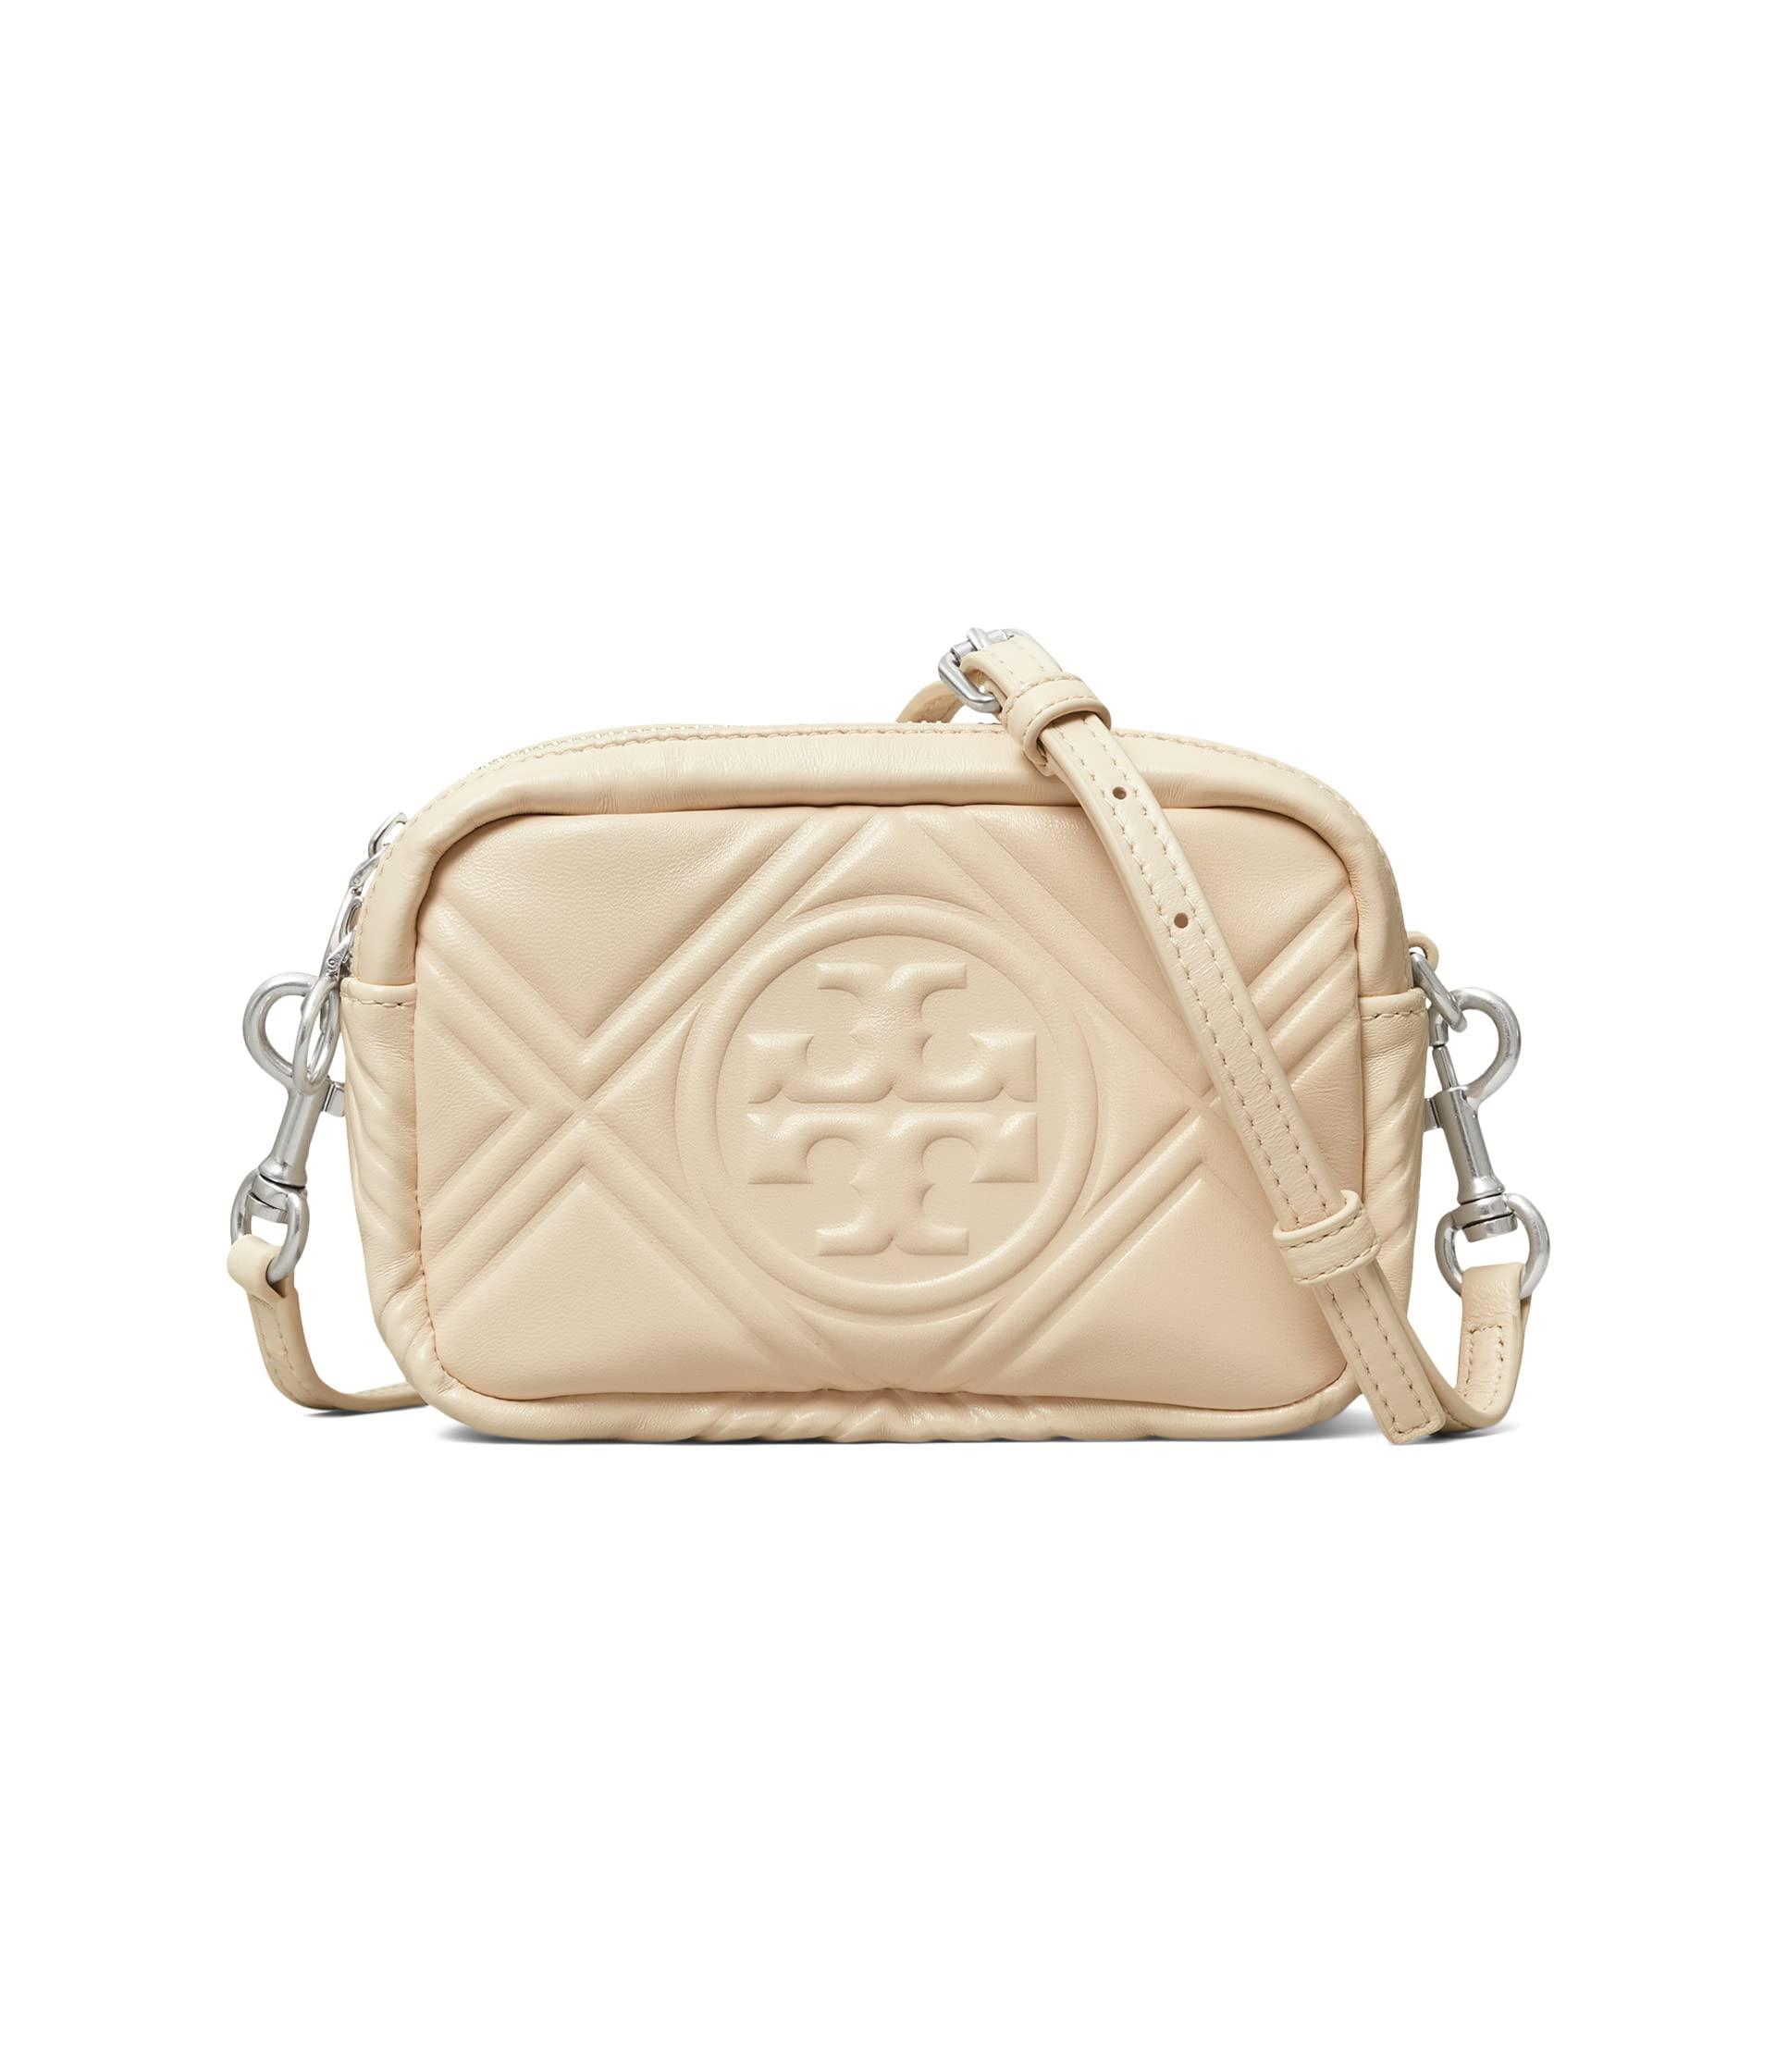 Tory Burch Perry Bombe Puffy Mini Bag in Natural | Lyst